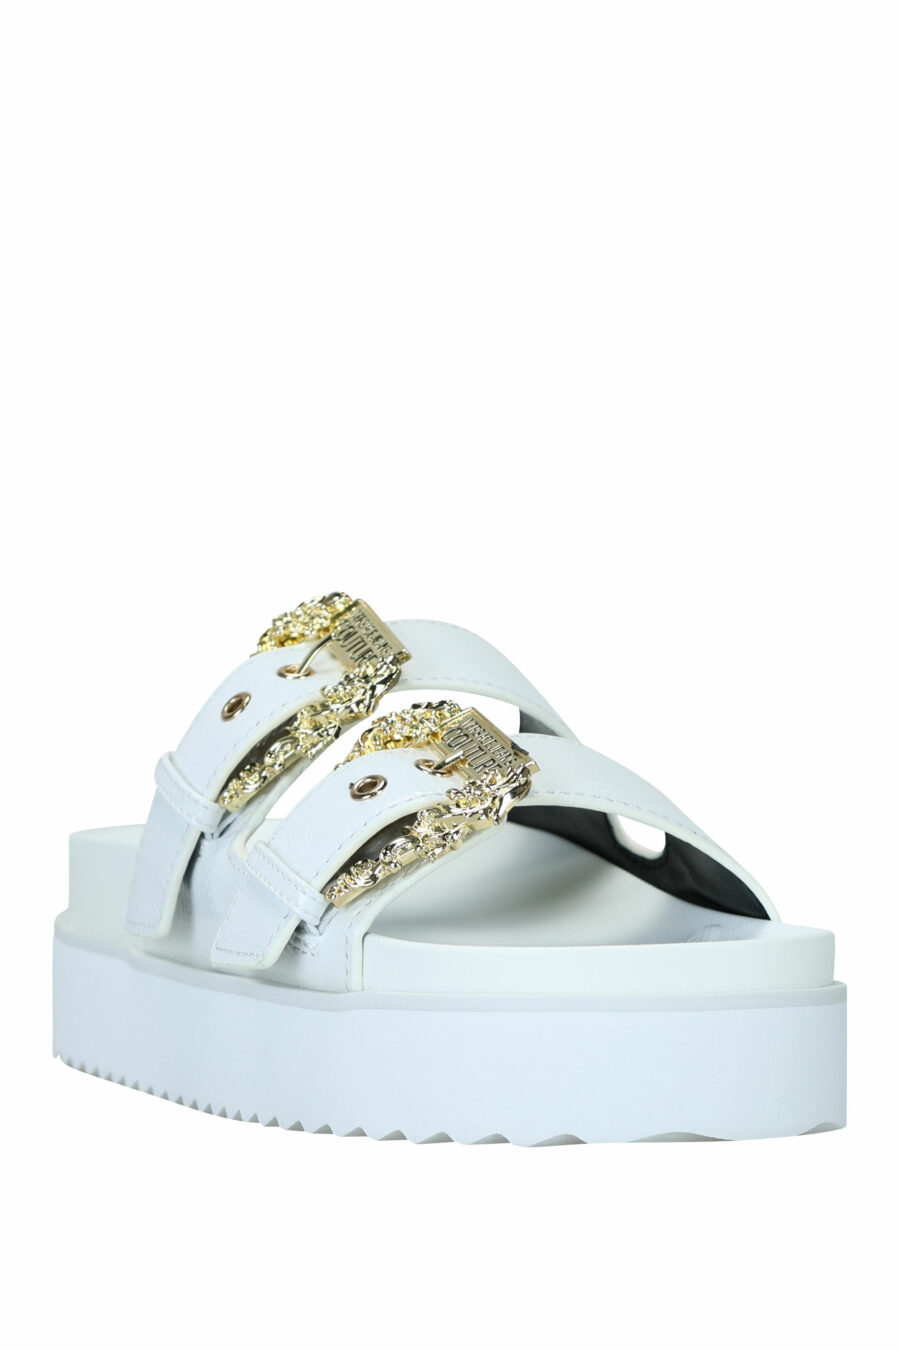 White sandals with gold baroque double buckle - 8052019607314 1